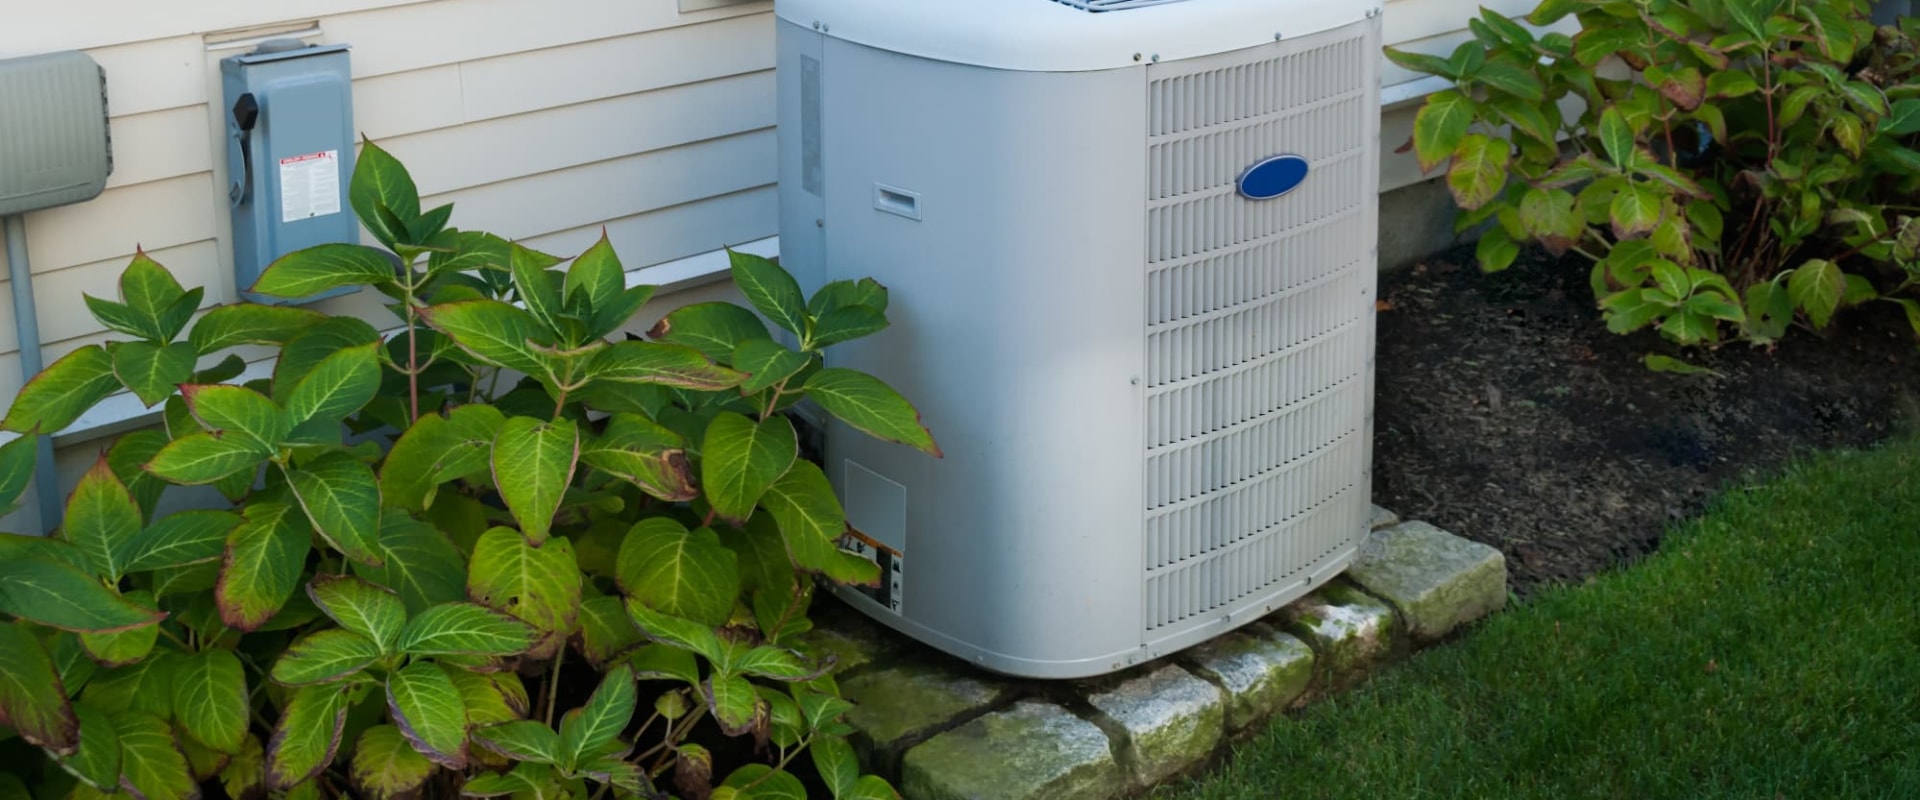 What time of year is best for hvac?